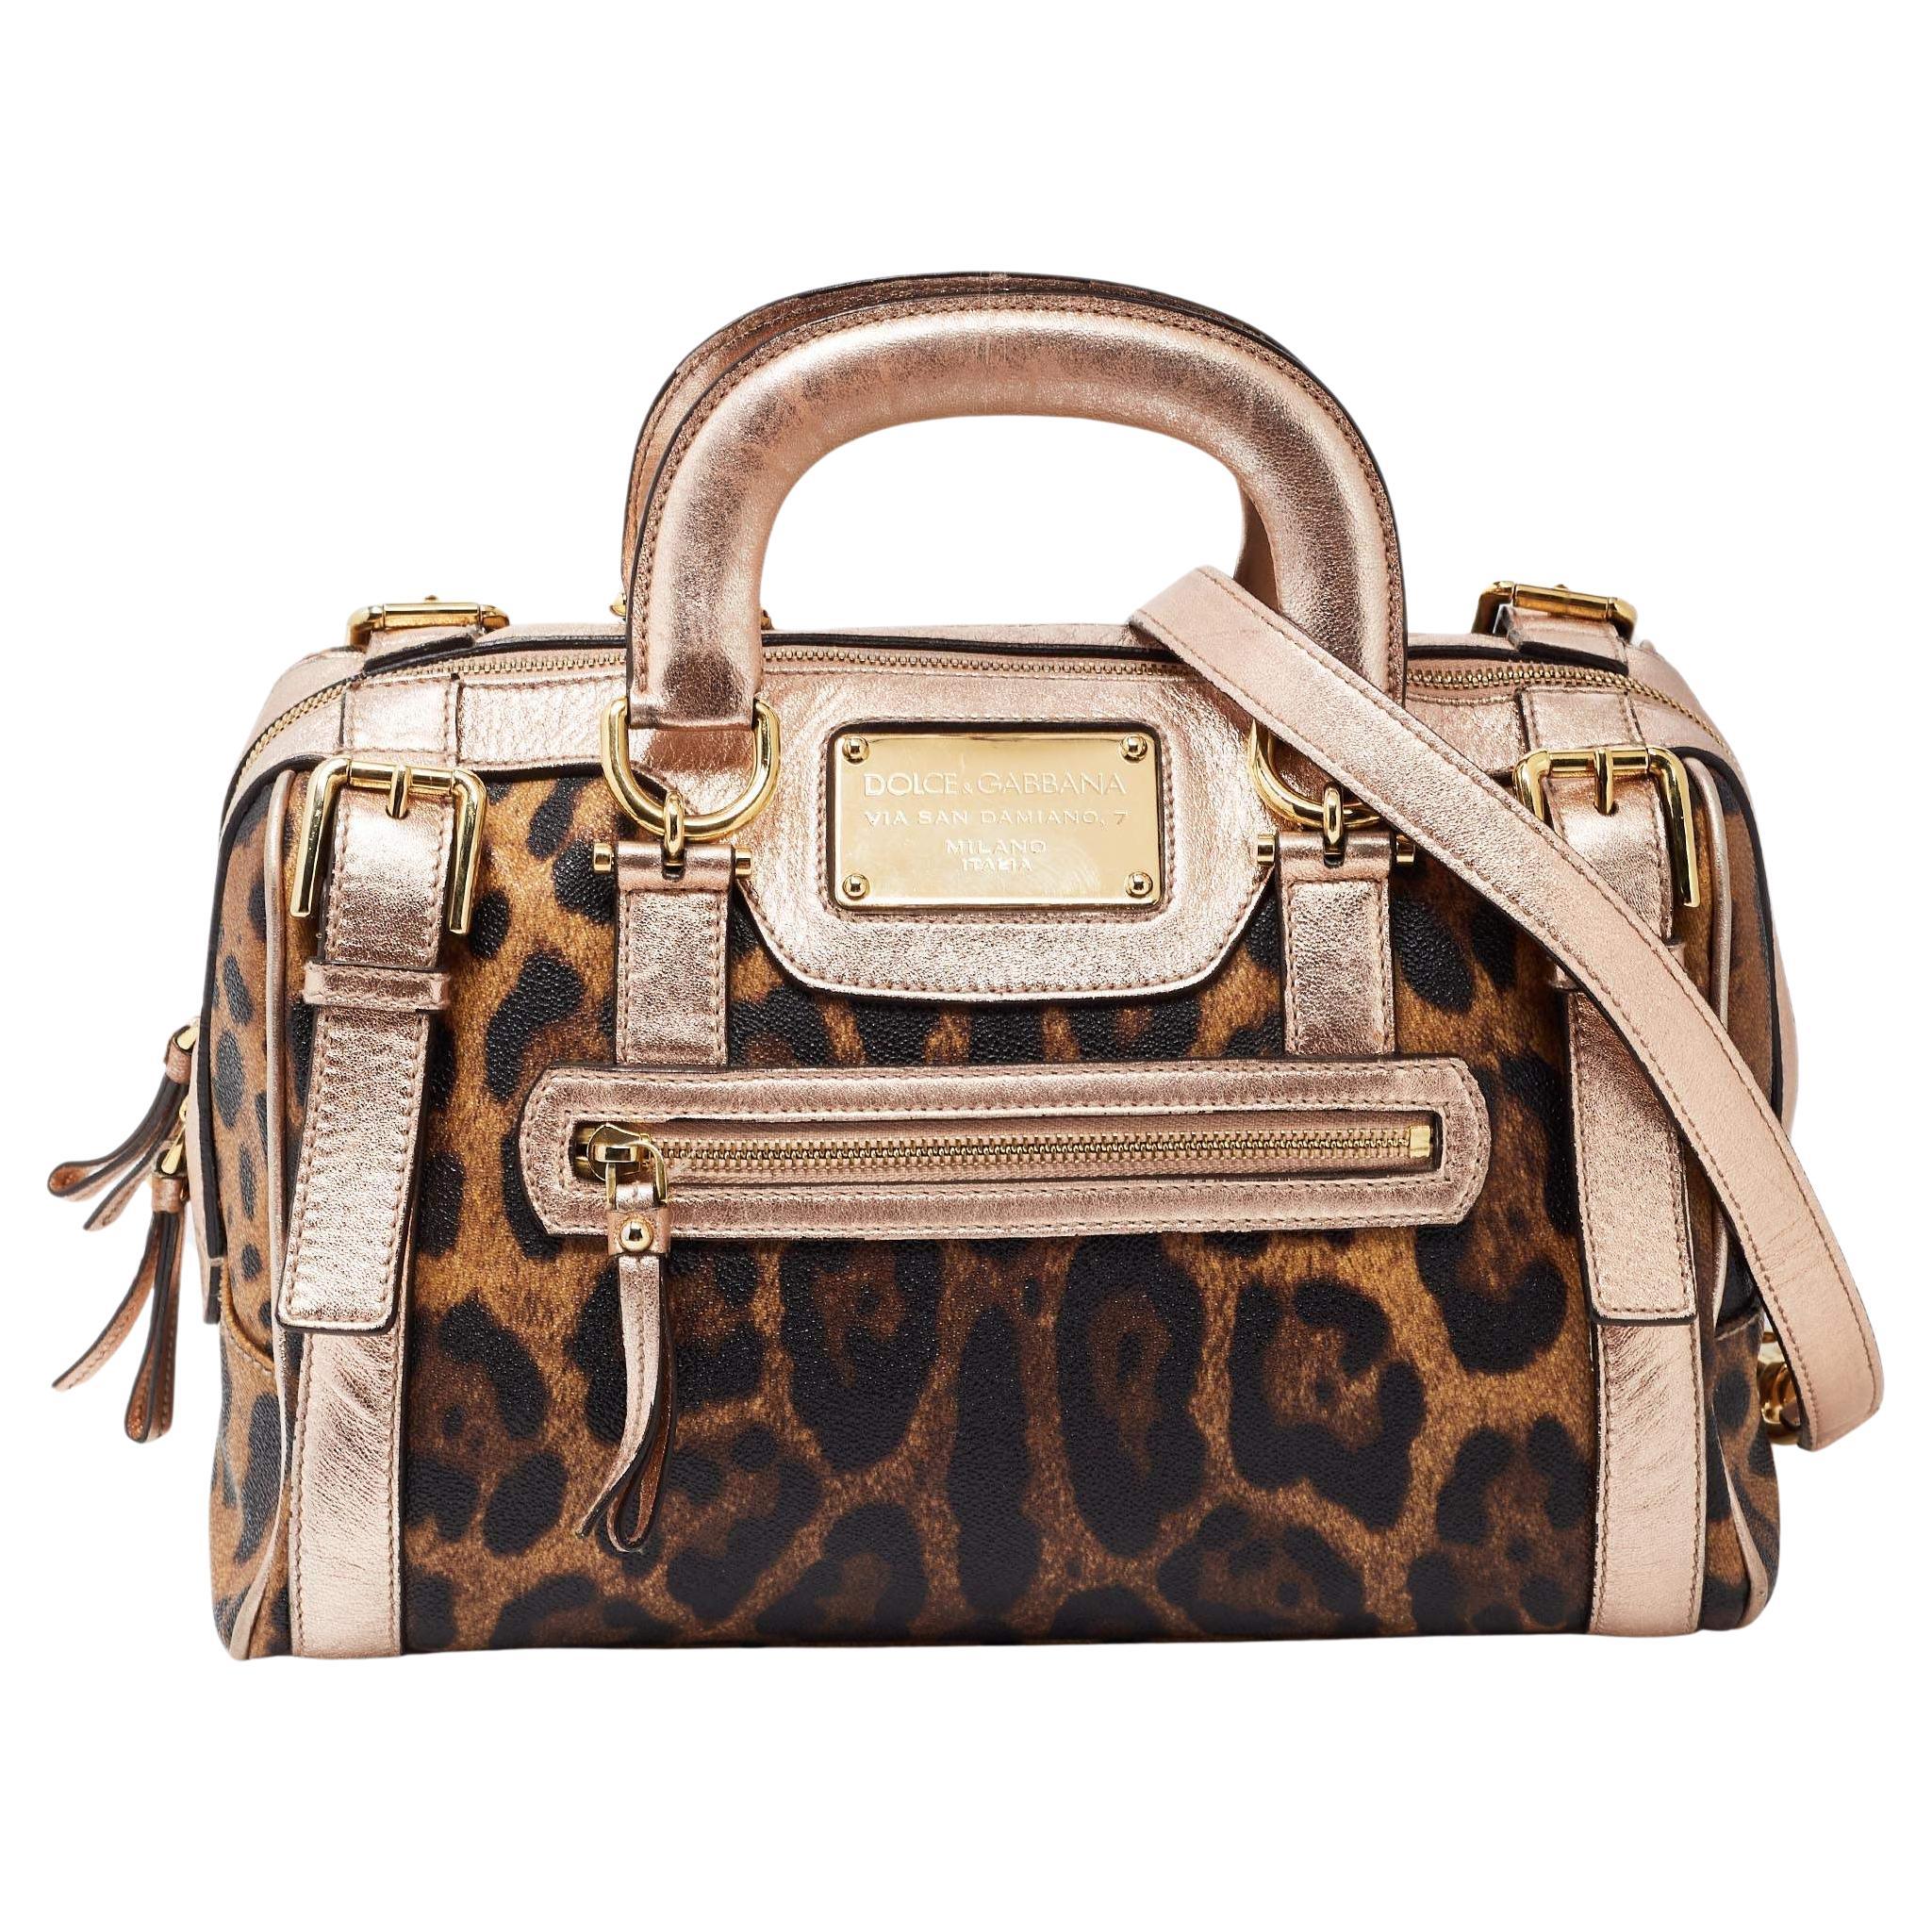 Dolce and Gabbana Brown/Metallic Pink Leopard Print Coated Canvas Satchel